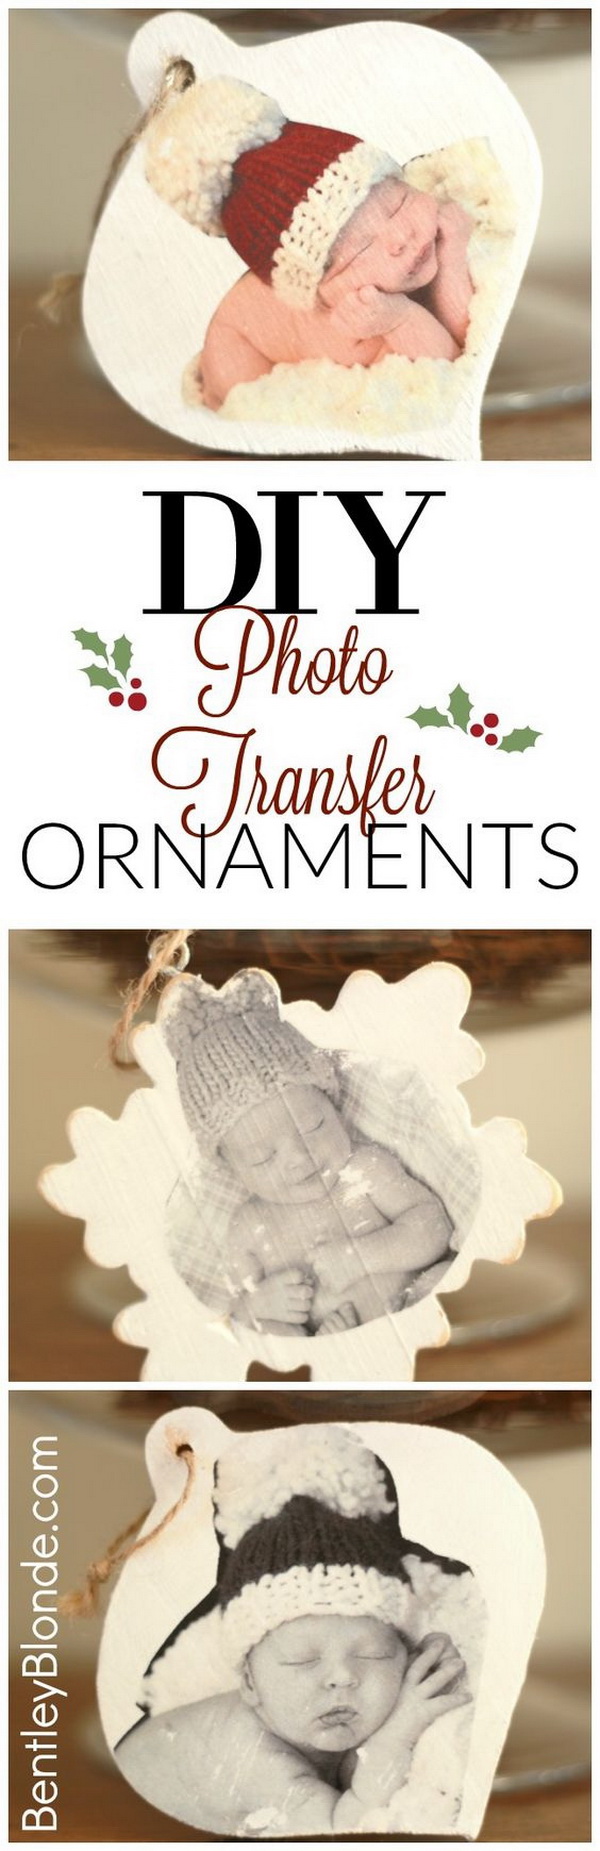 DIY Wood Christmas Ornaments with Photo Transfer. 